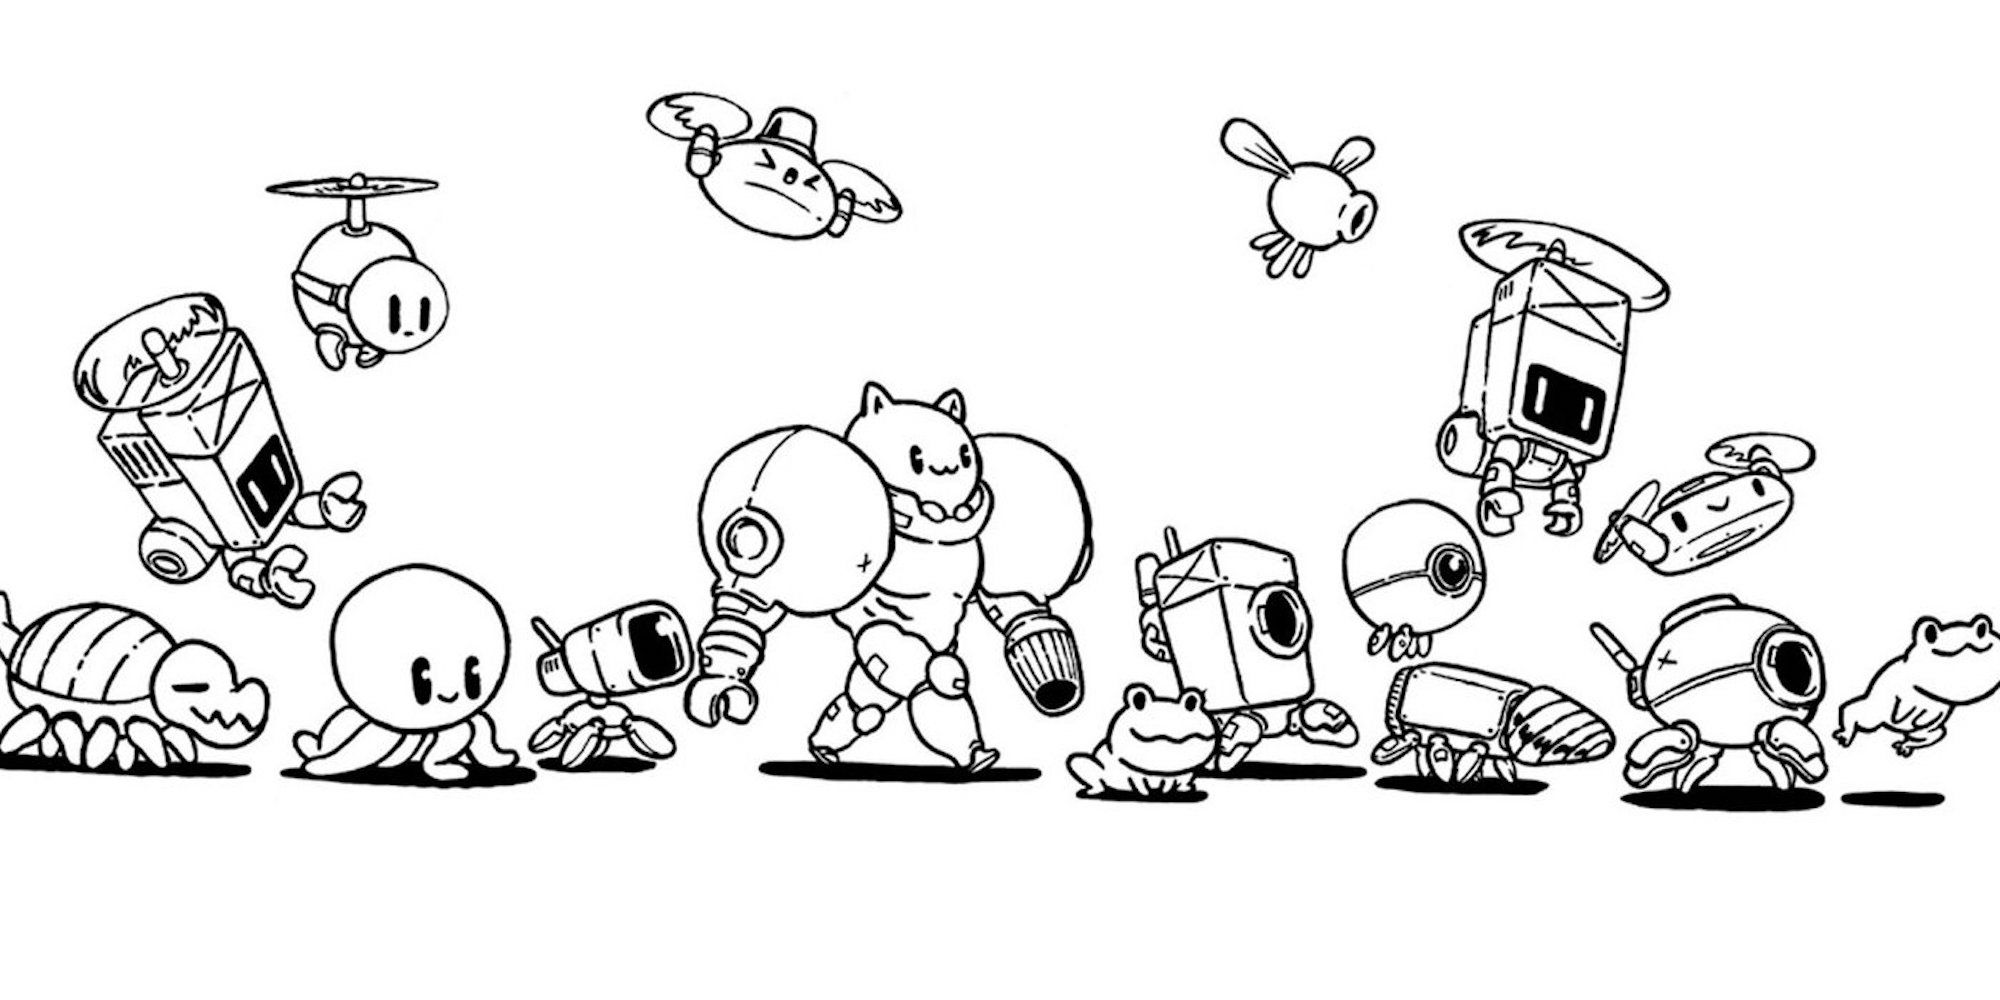 Promo art featuring characters from Gato Roboto